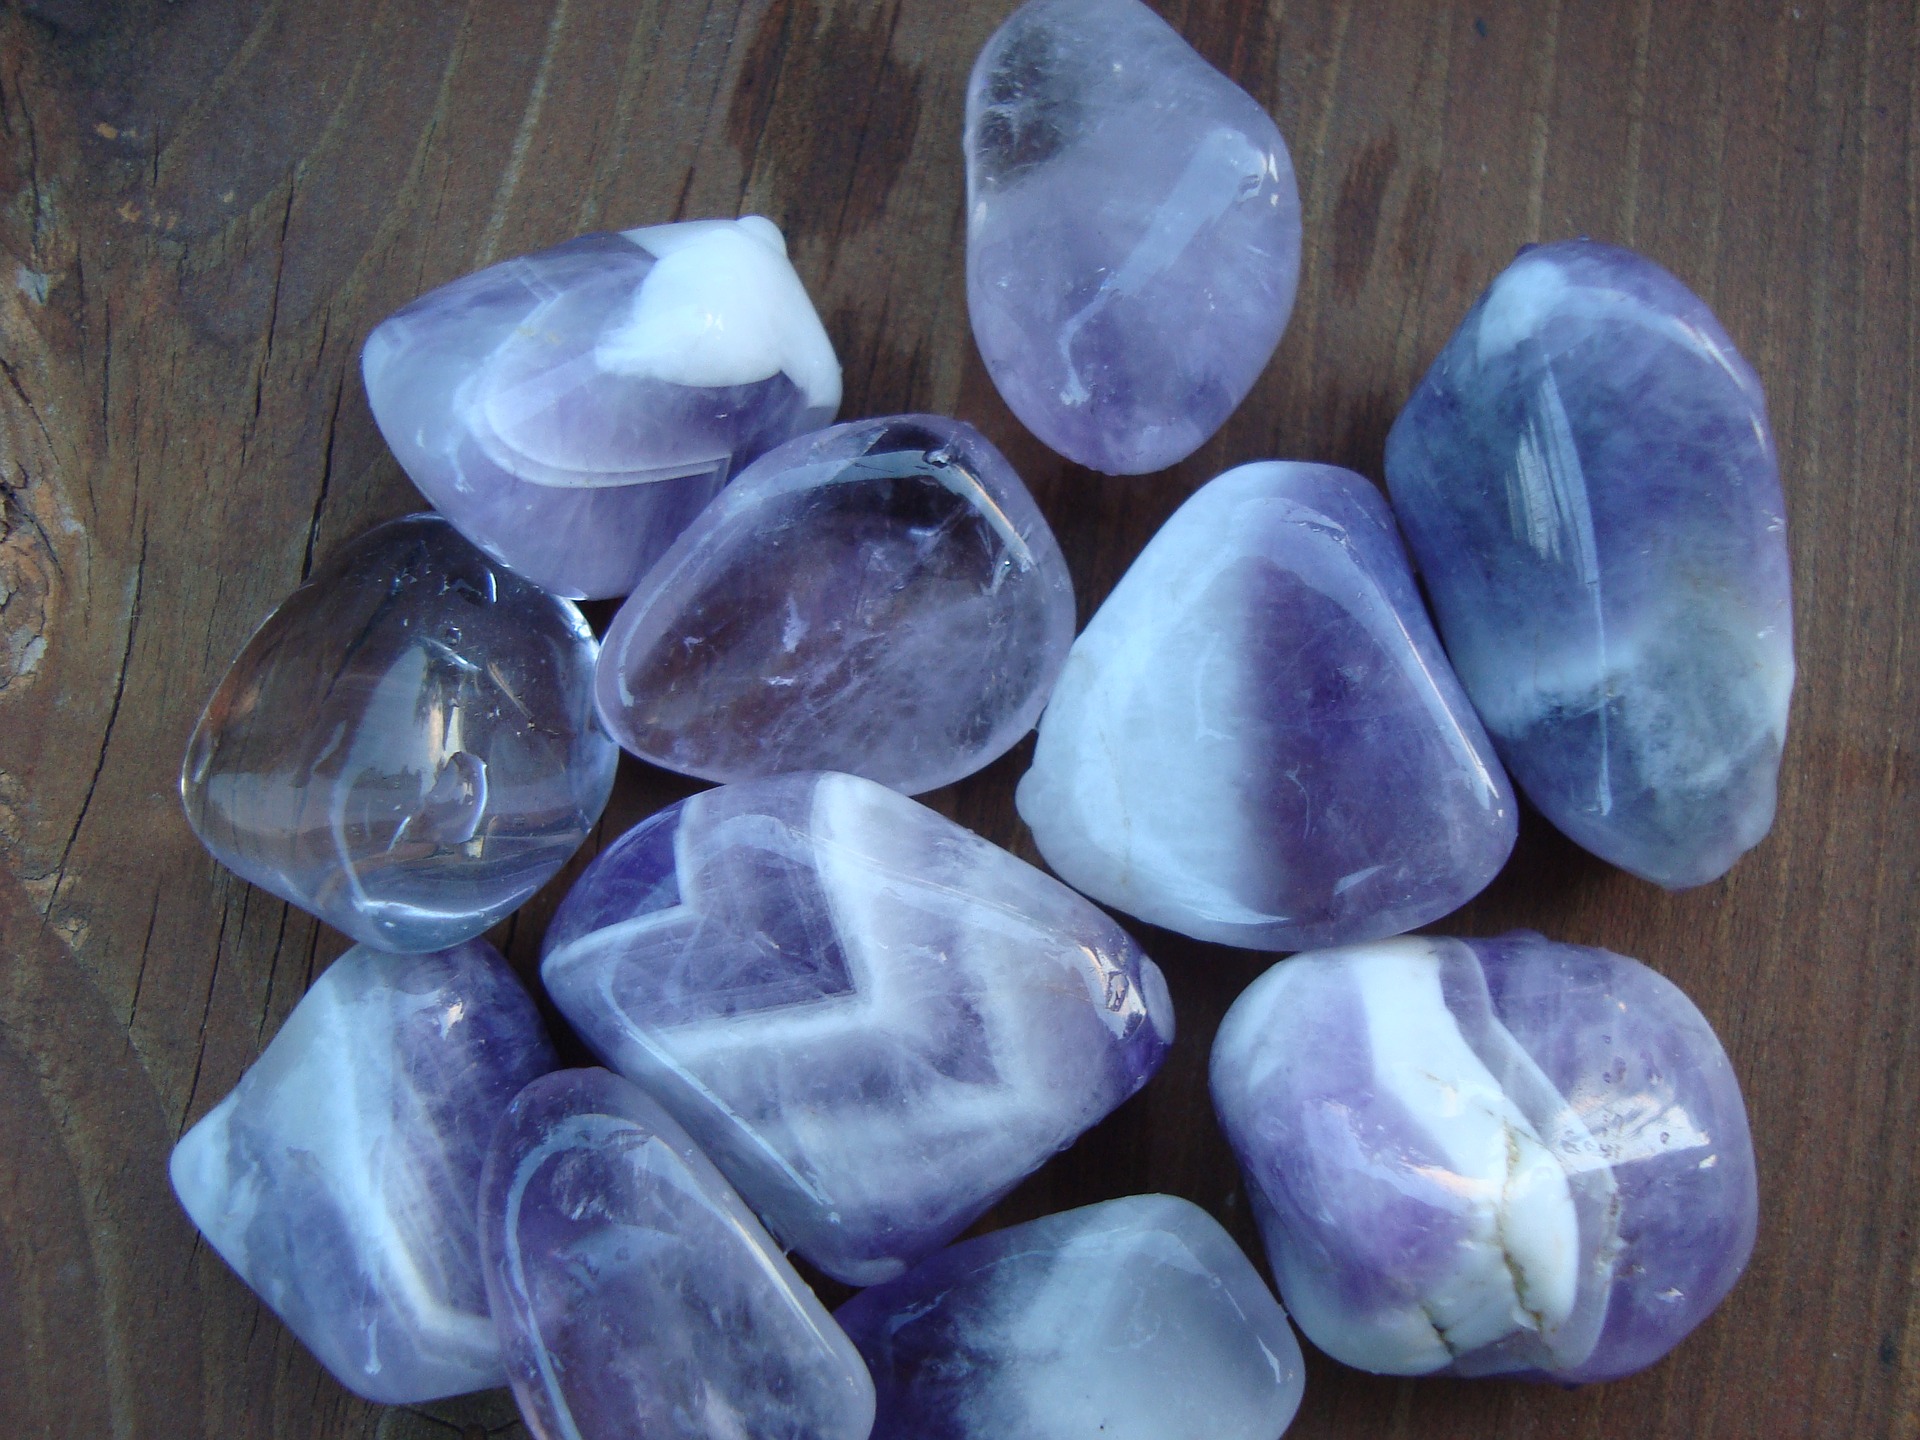 One of the most popular healing and balancing crystals that foster equilibrium.